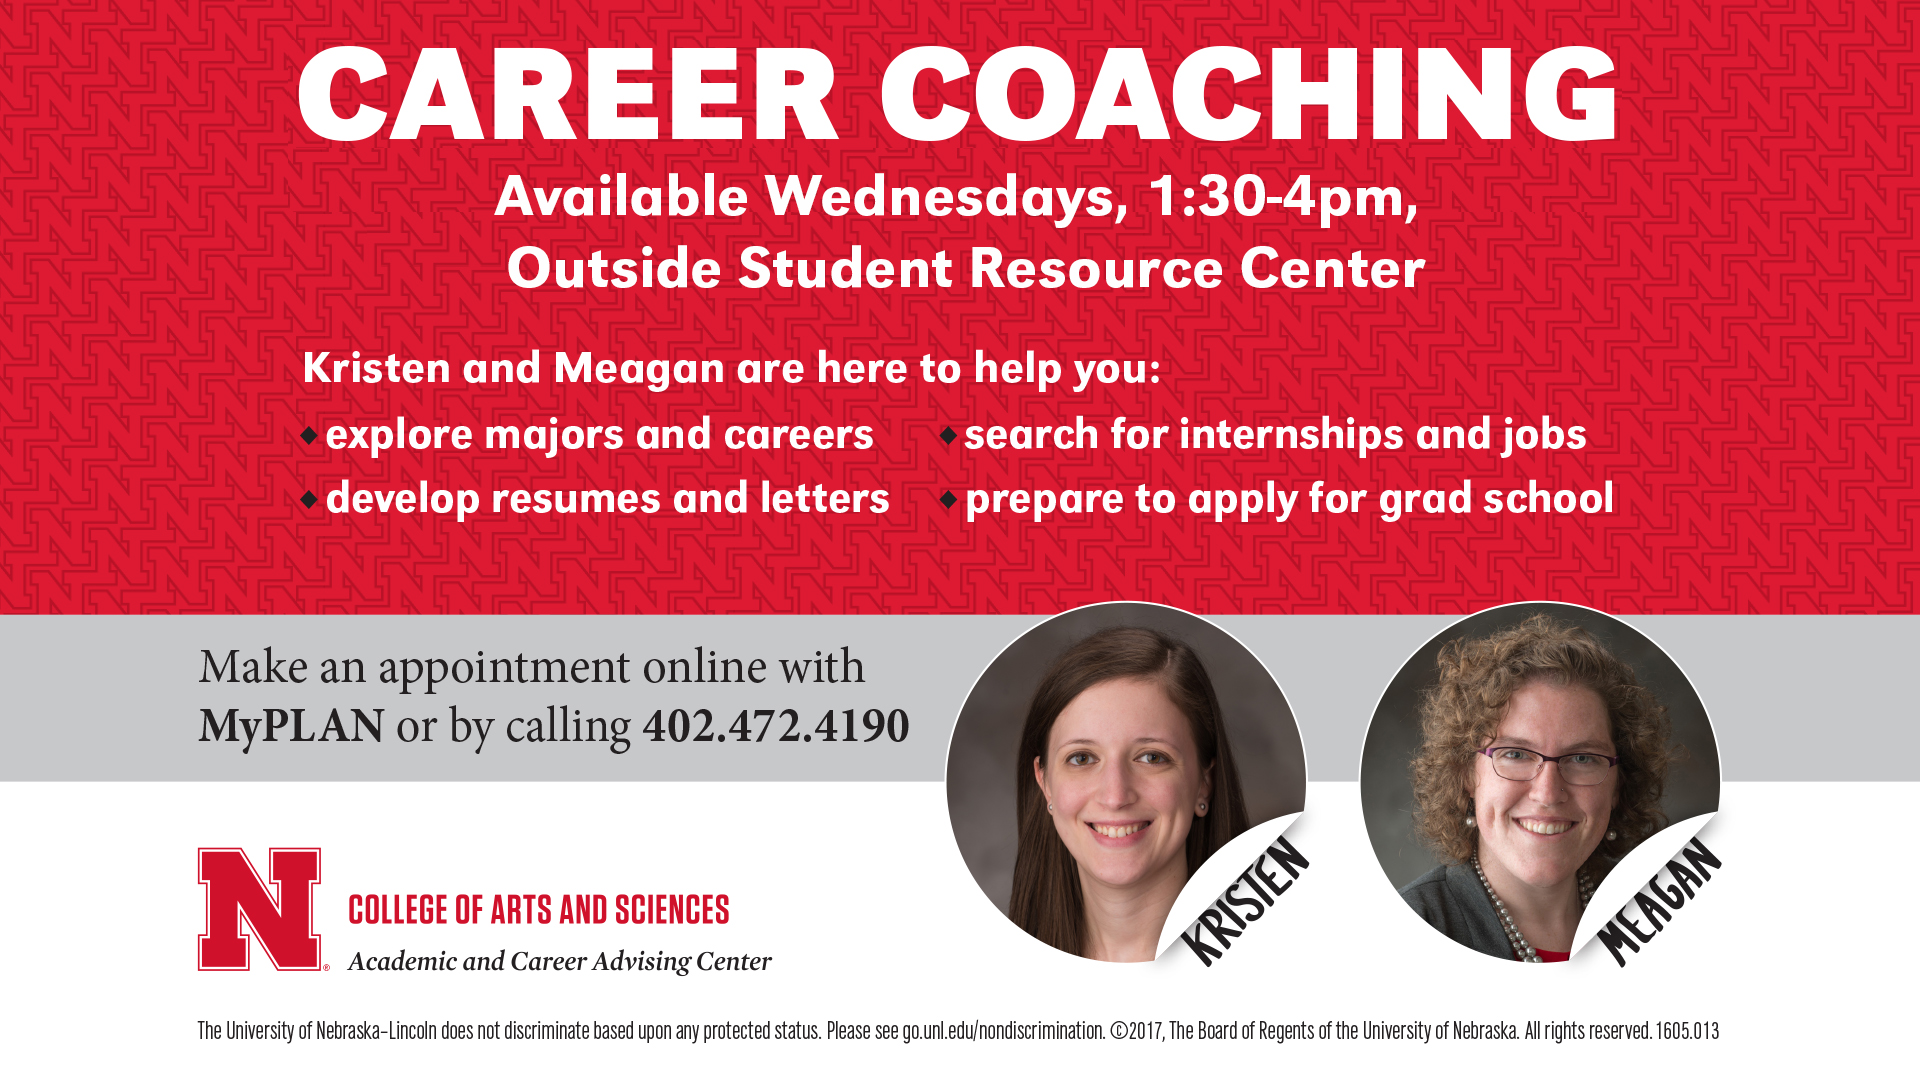 Career coaches Kristen Aldrich and Meagan Savage will be in Avery Hall every Wednesday to answer your career questions.